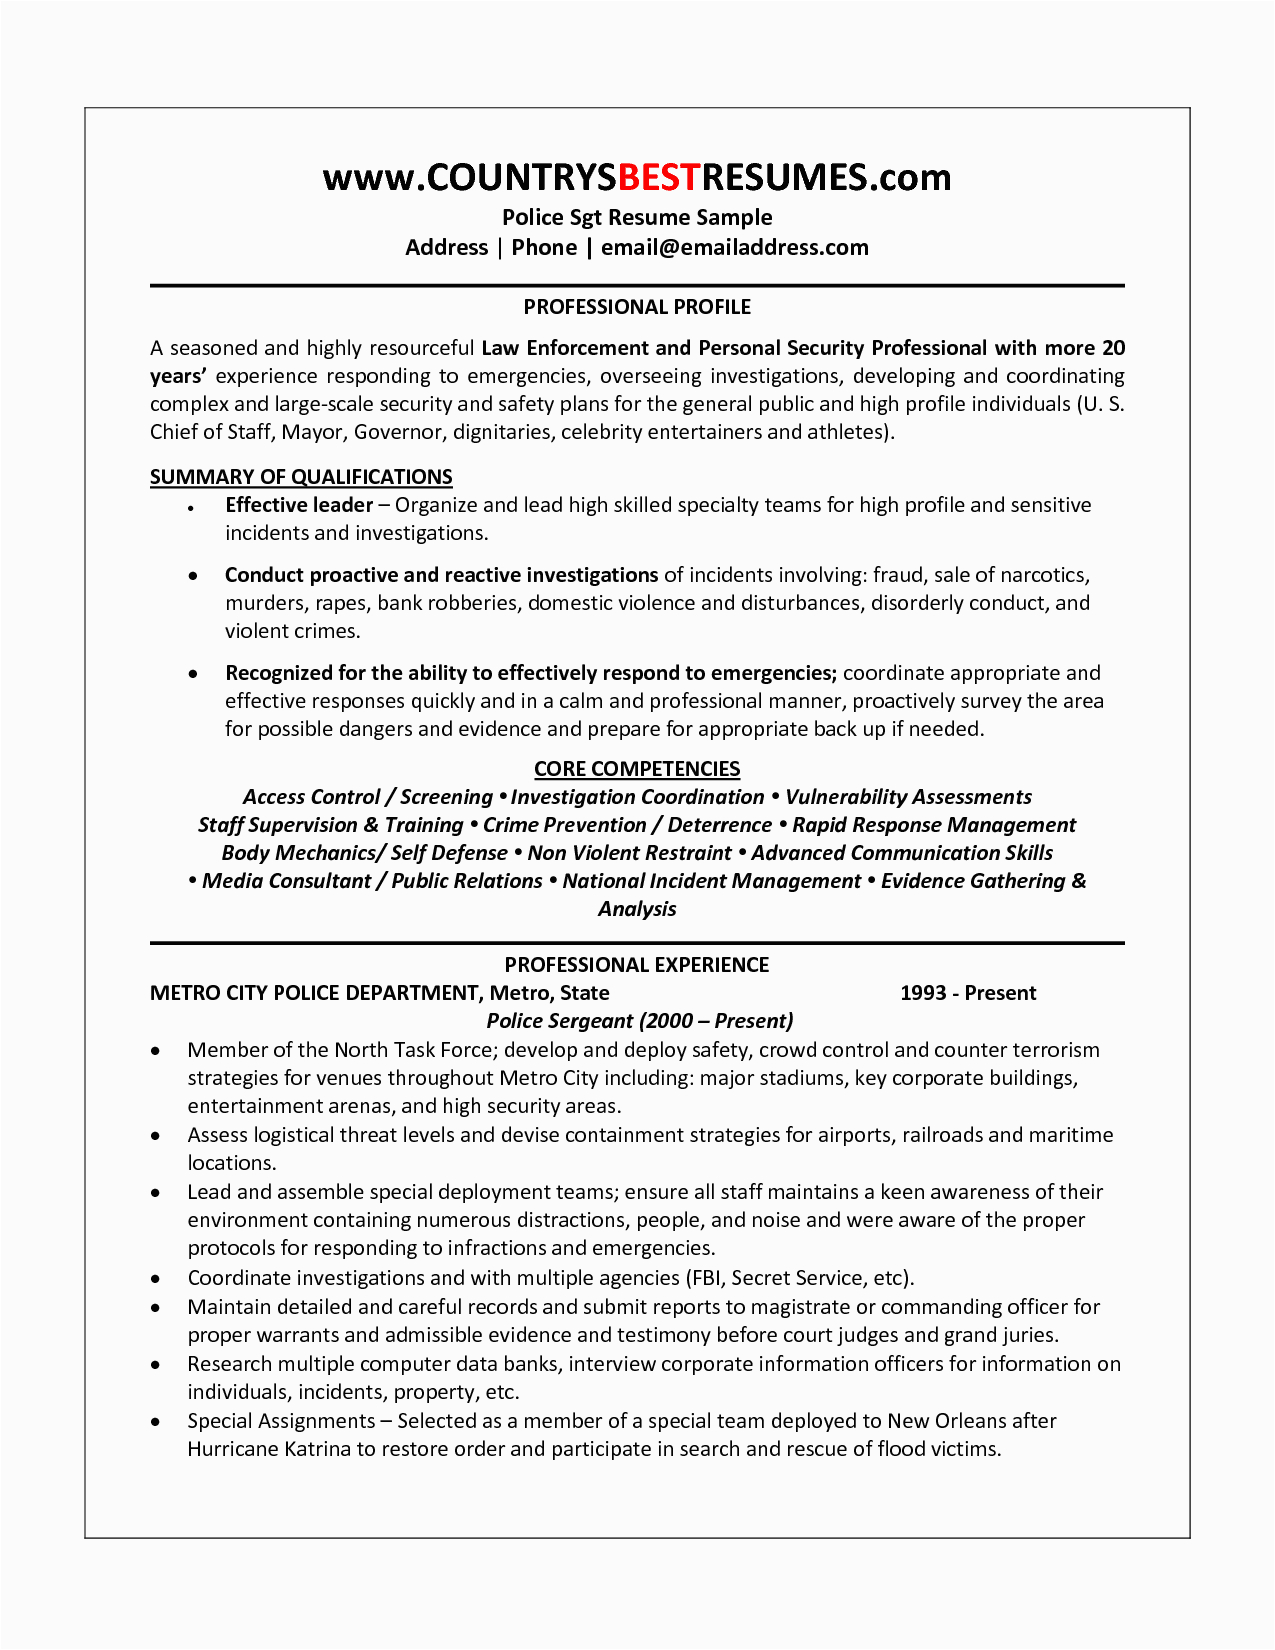 Police Officer Resume Objective Statement Samples 16 Beautiful Sample Police Ficer Resume